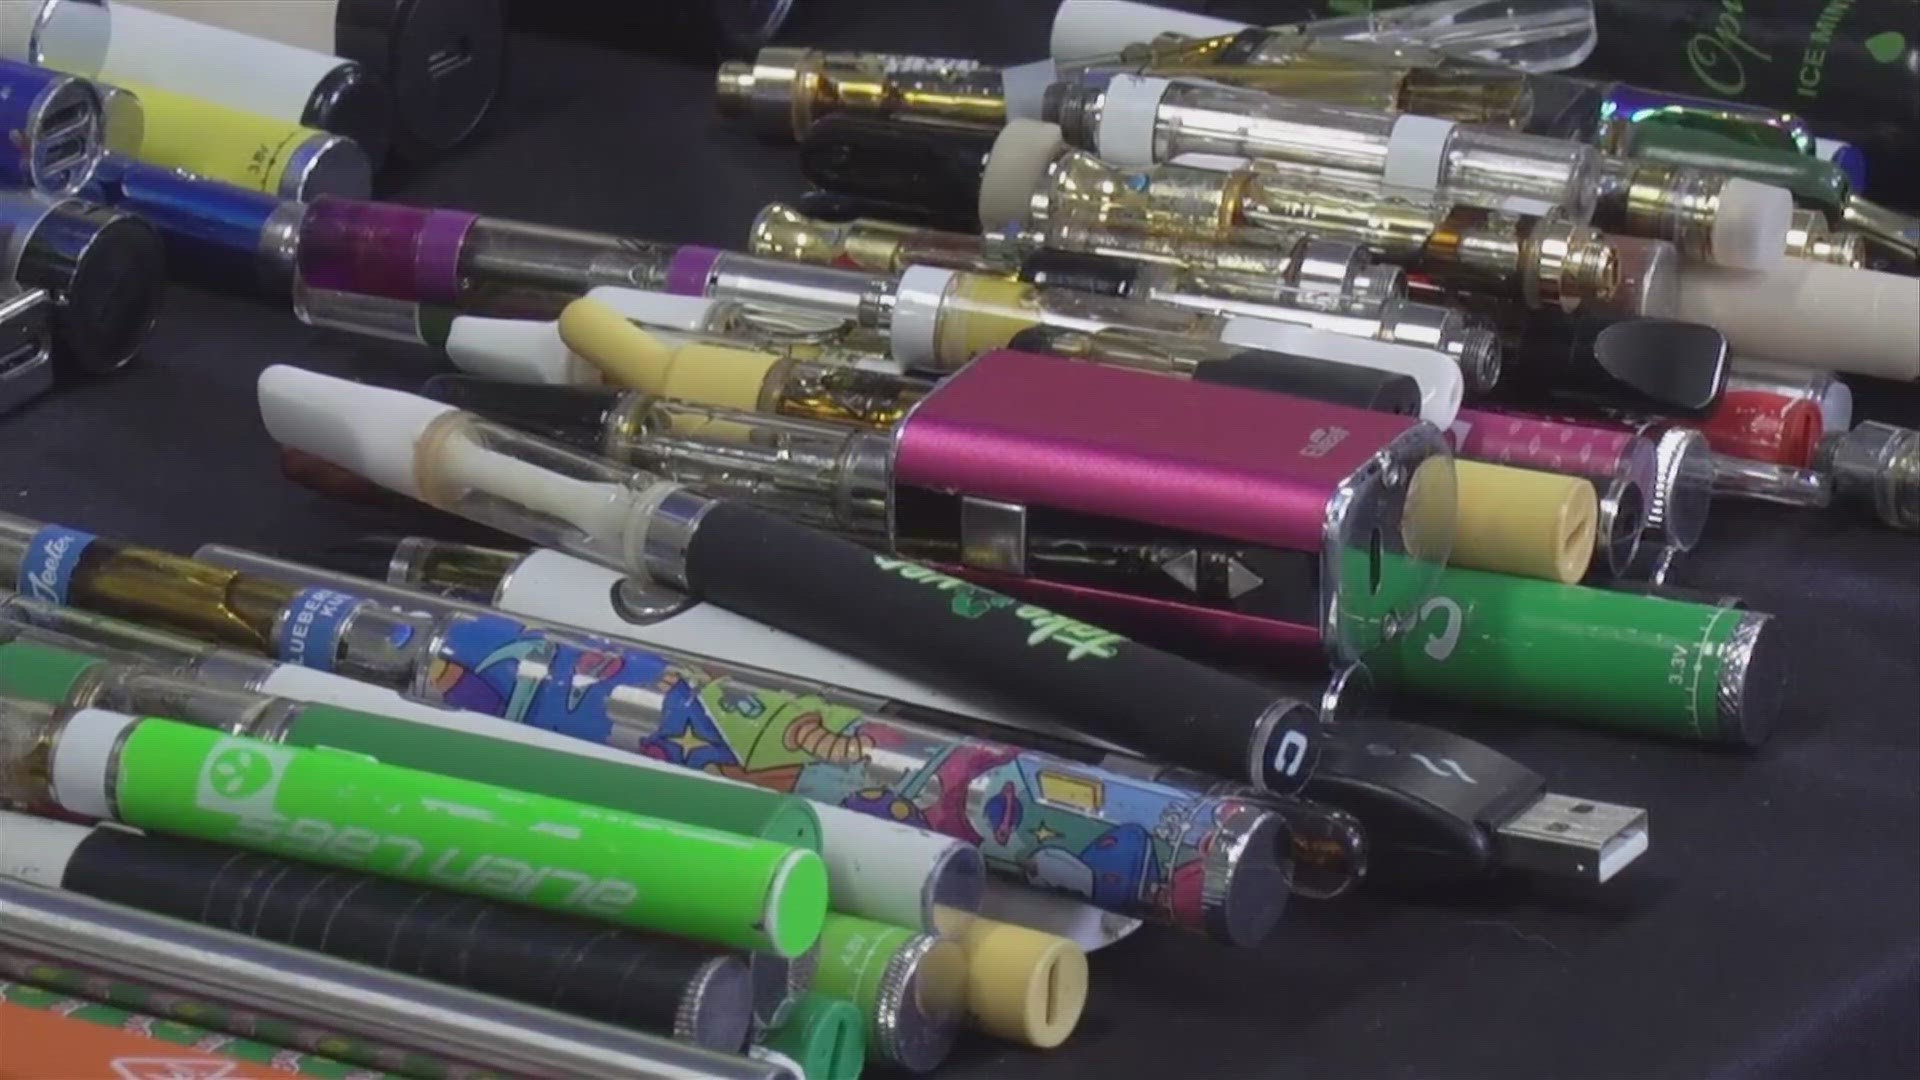 Officials said undercover detectives found 11 of 13 randomly selected vape shops were still carrying flavored tobacco, which isn't legal in California.